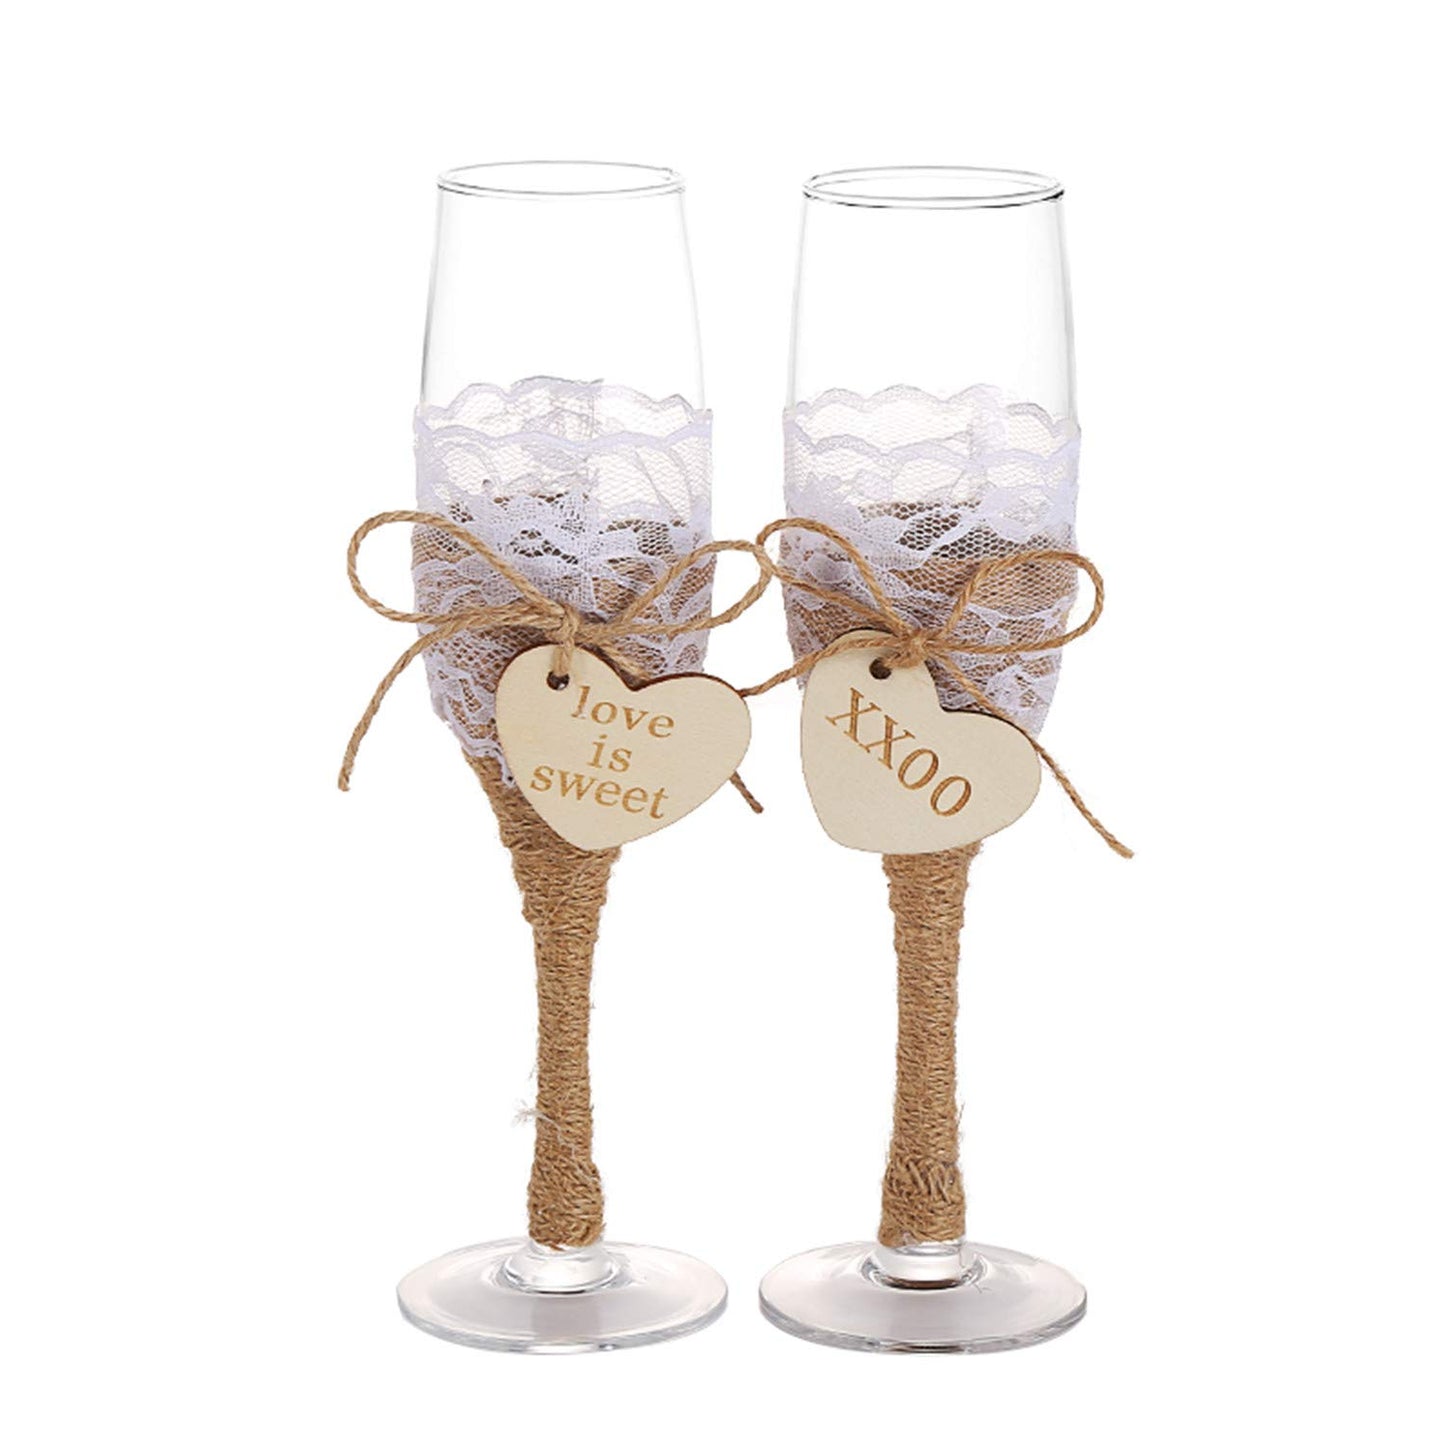 Set of 2 Rustic Style Elegant Wedding Champagne Glasses with Twine